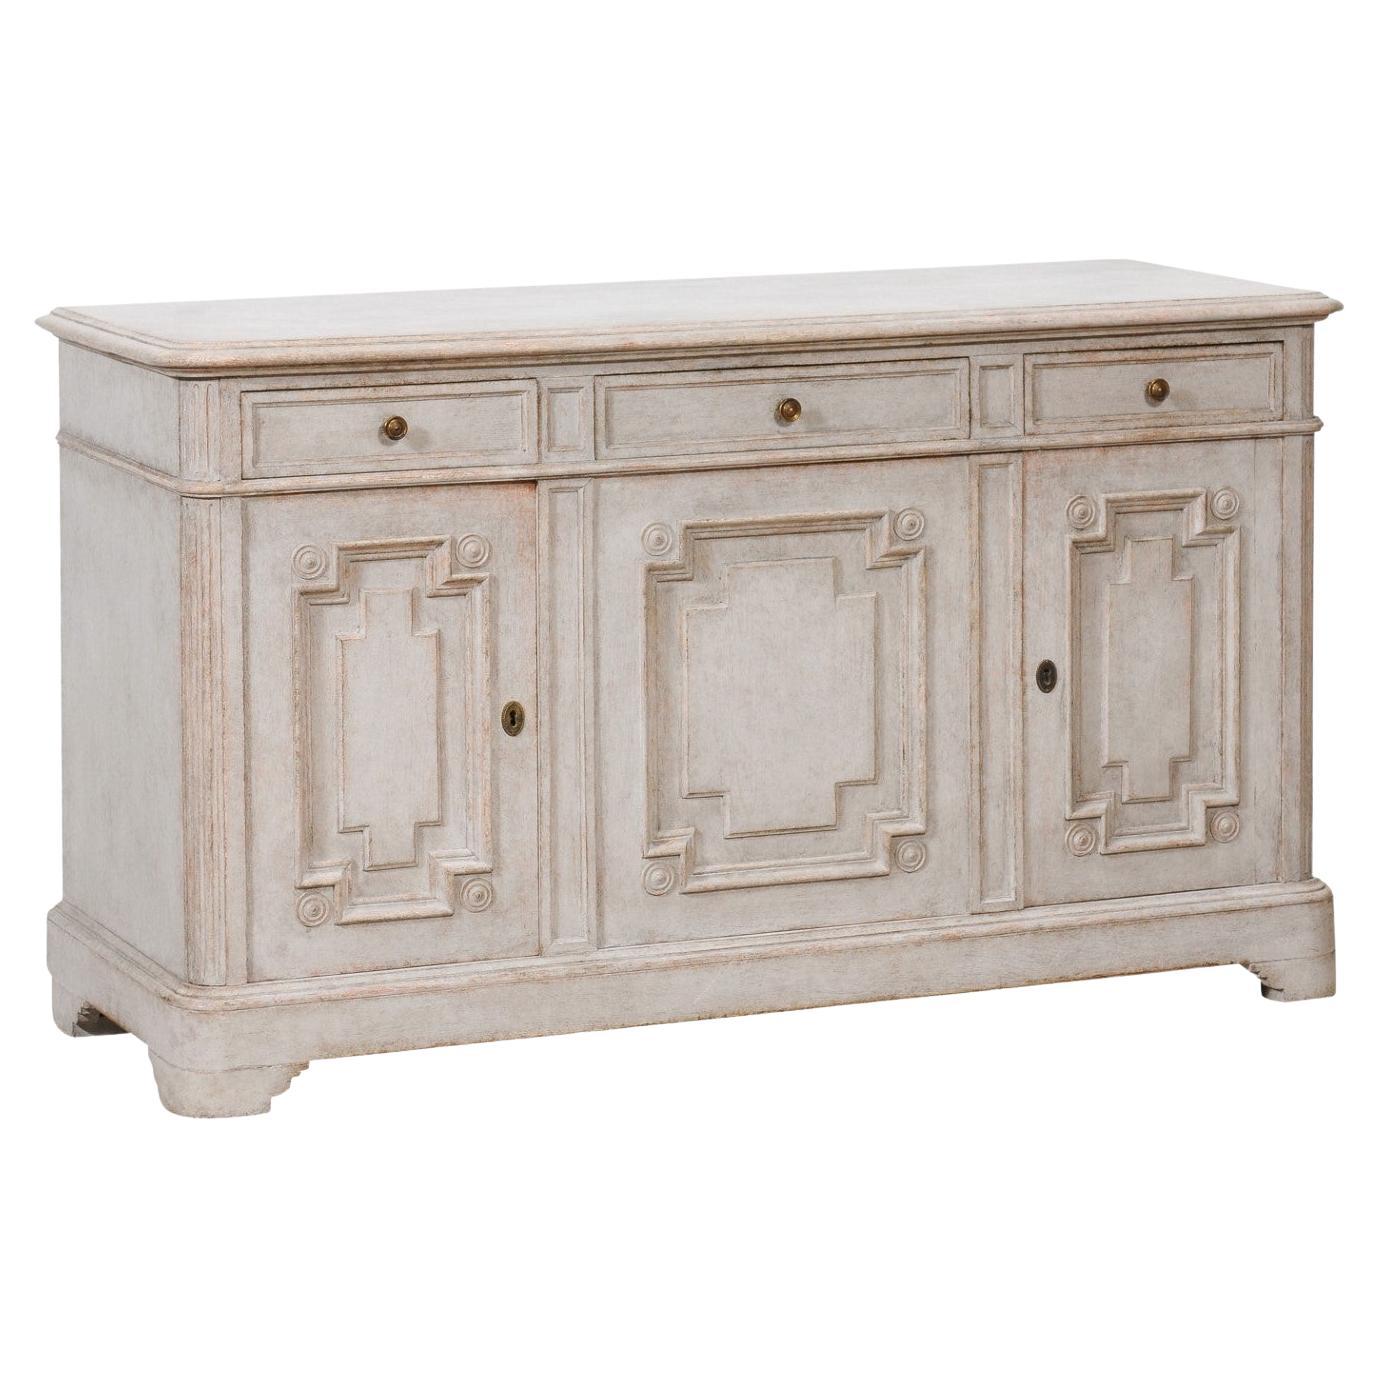 Swedish Gustavian Style 1890s Painted Sideboard with Carved Geometric Motifs For Sale